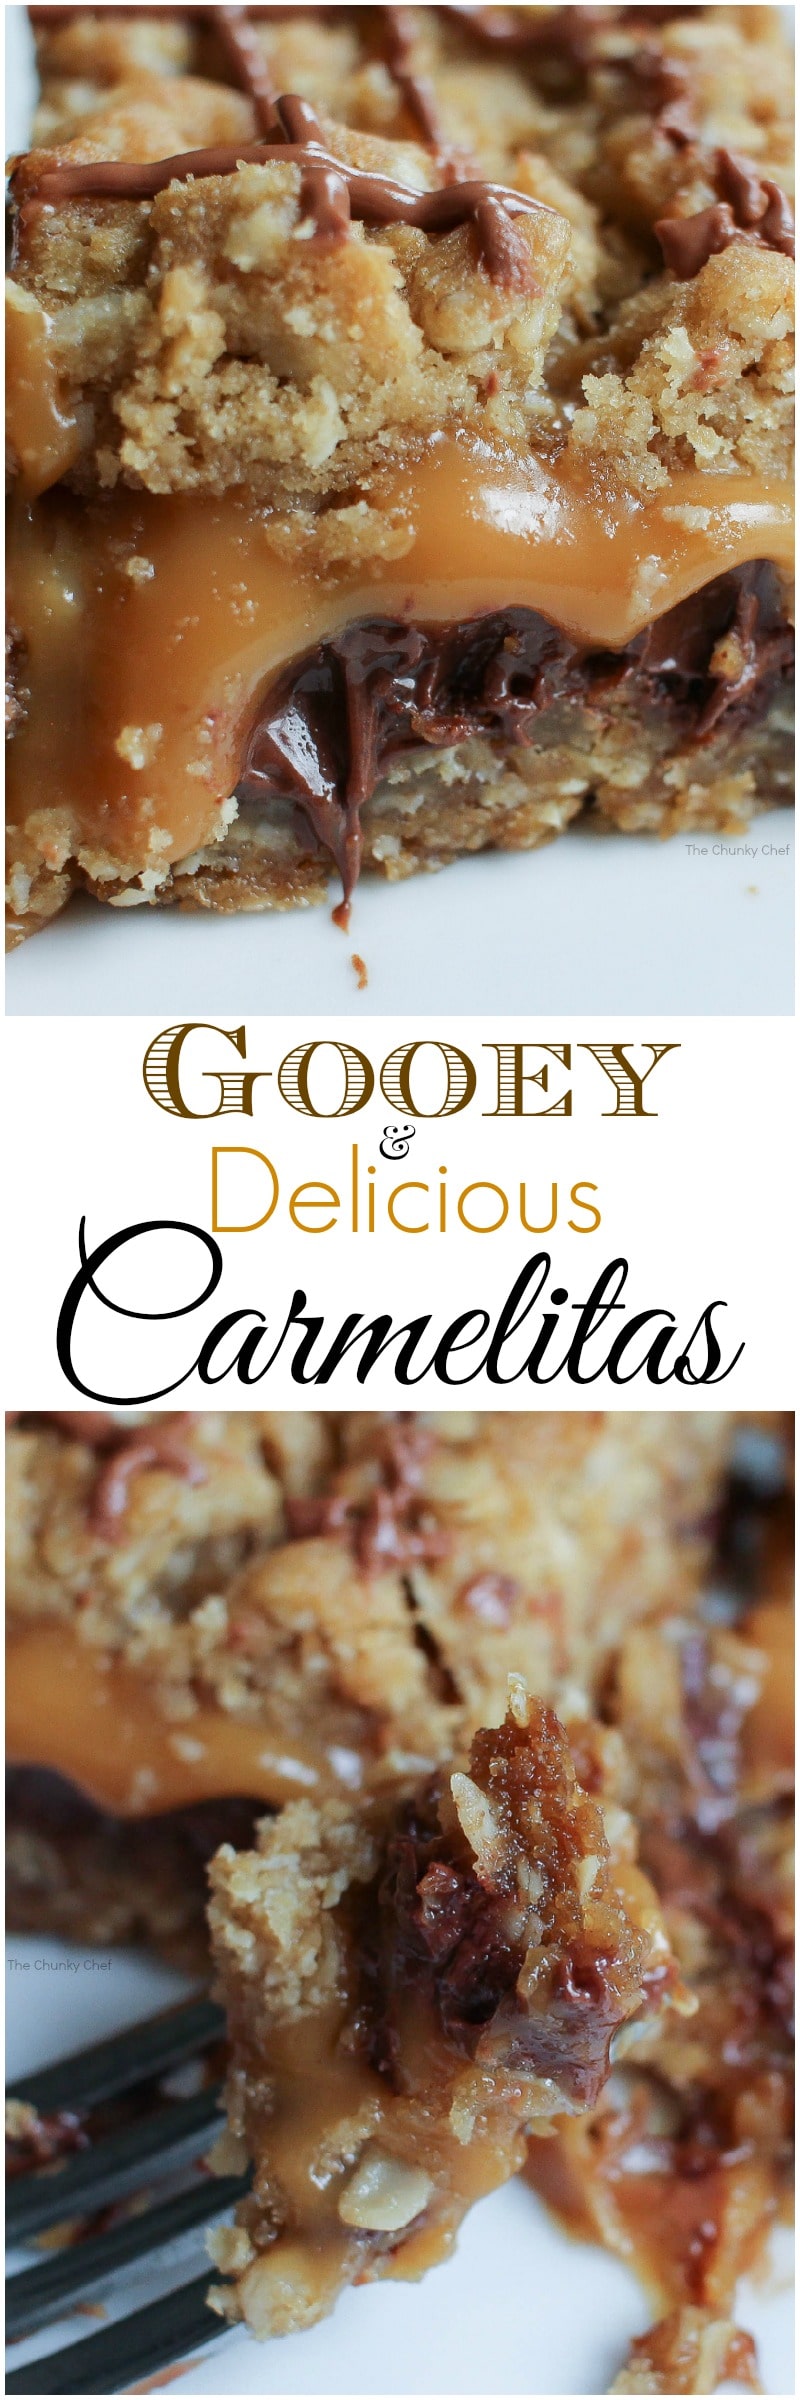 The perfect sweet treat for any occasion... these carmelitas are full of sweet oats, luscious chocolate and decadent melted caramel!